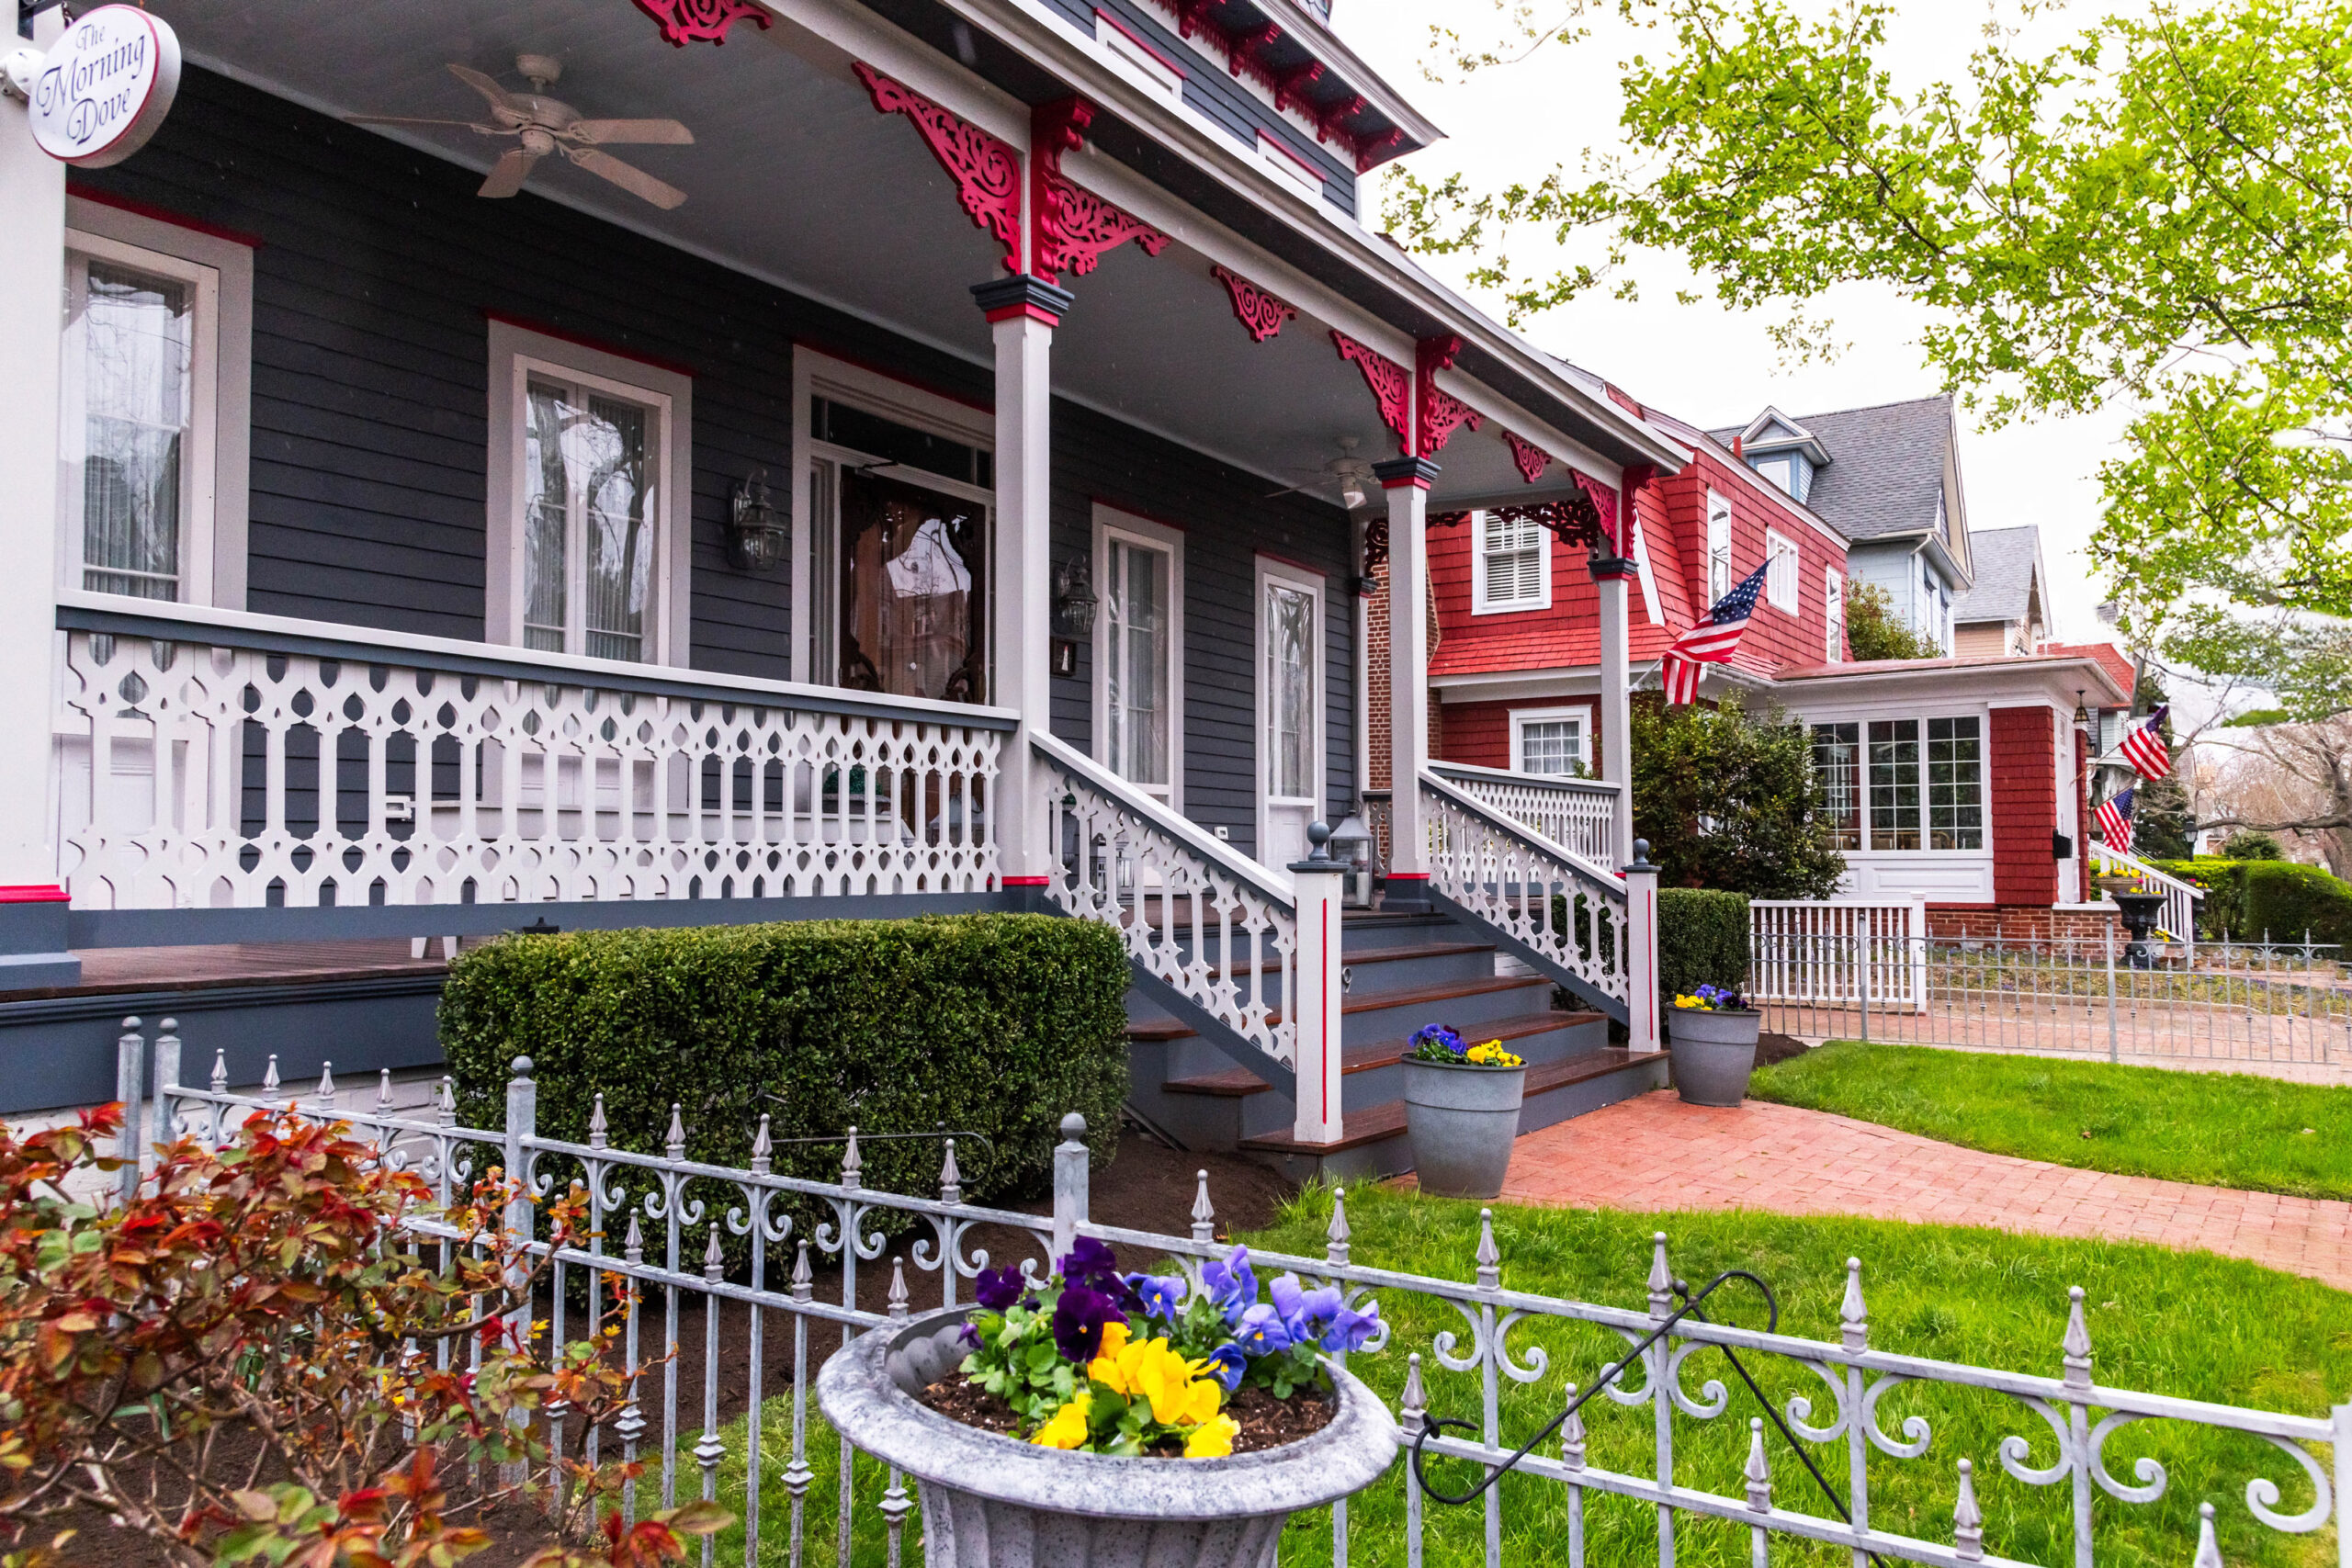 A grey blue Victorian porch with flower pots filled with yellow and purple pansies. It's a cloudy day, and the other houses on Hughes street are in the background.